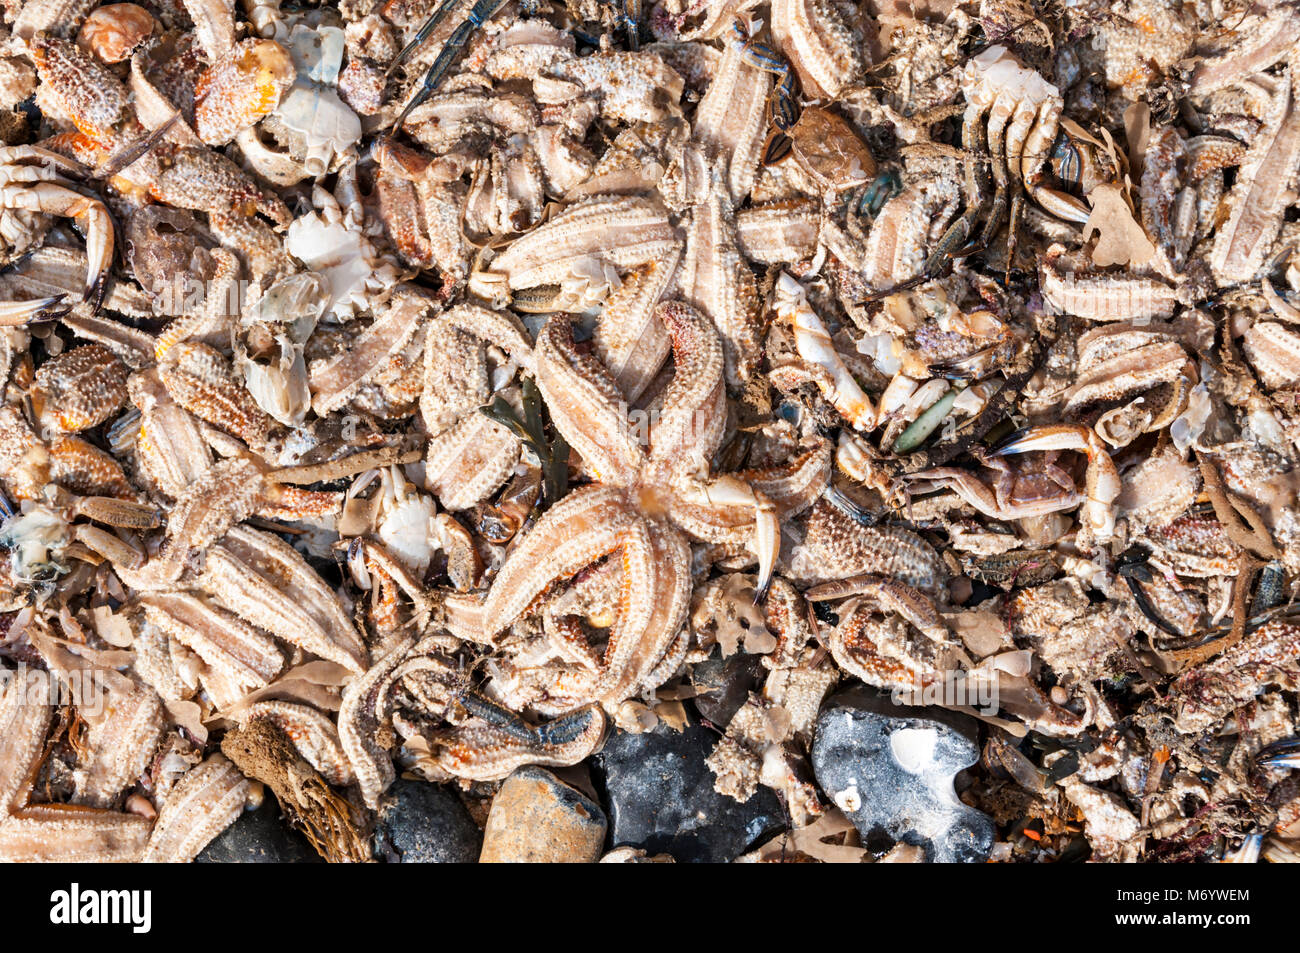 Dead starfish & crabs washed up on the Kent coast. They died due to freezing weather & storms at the beginning of March 2018. Details in Description.  Stock Photo